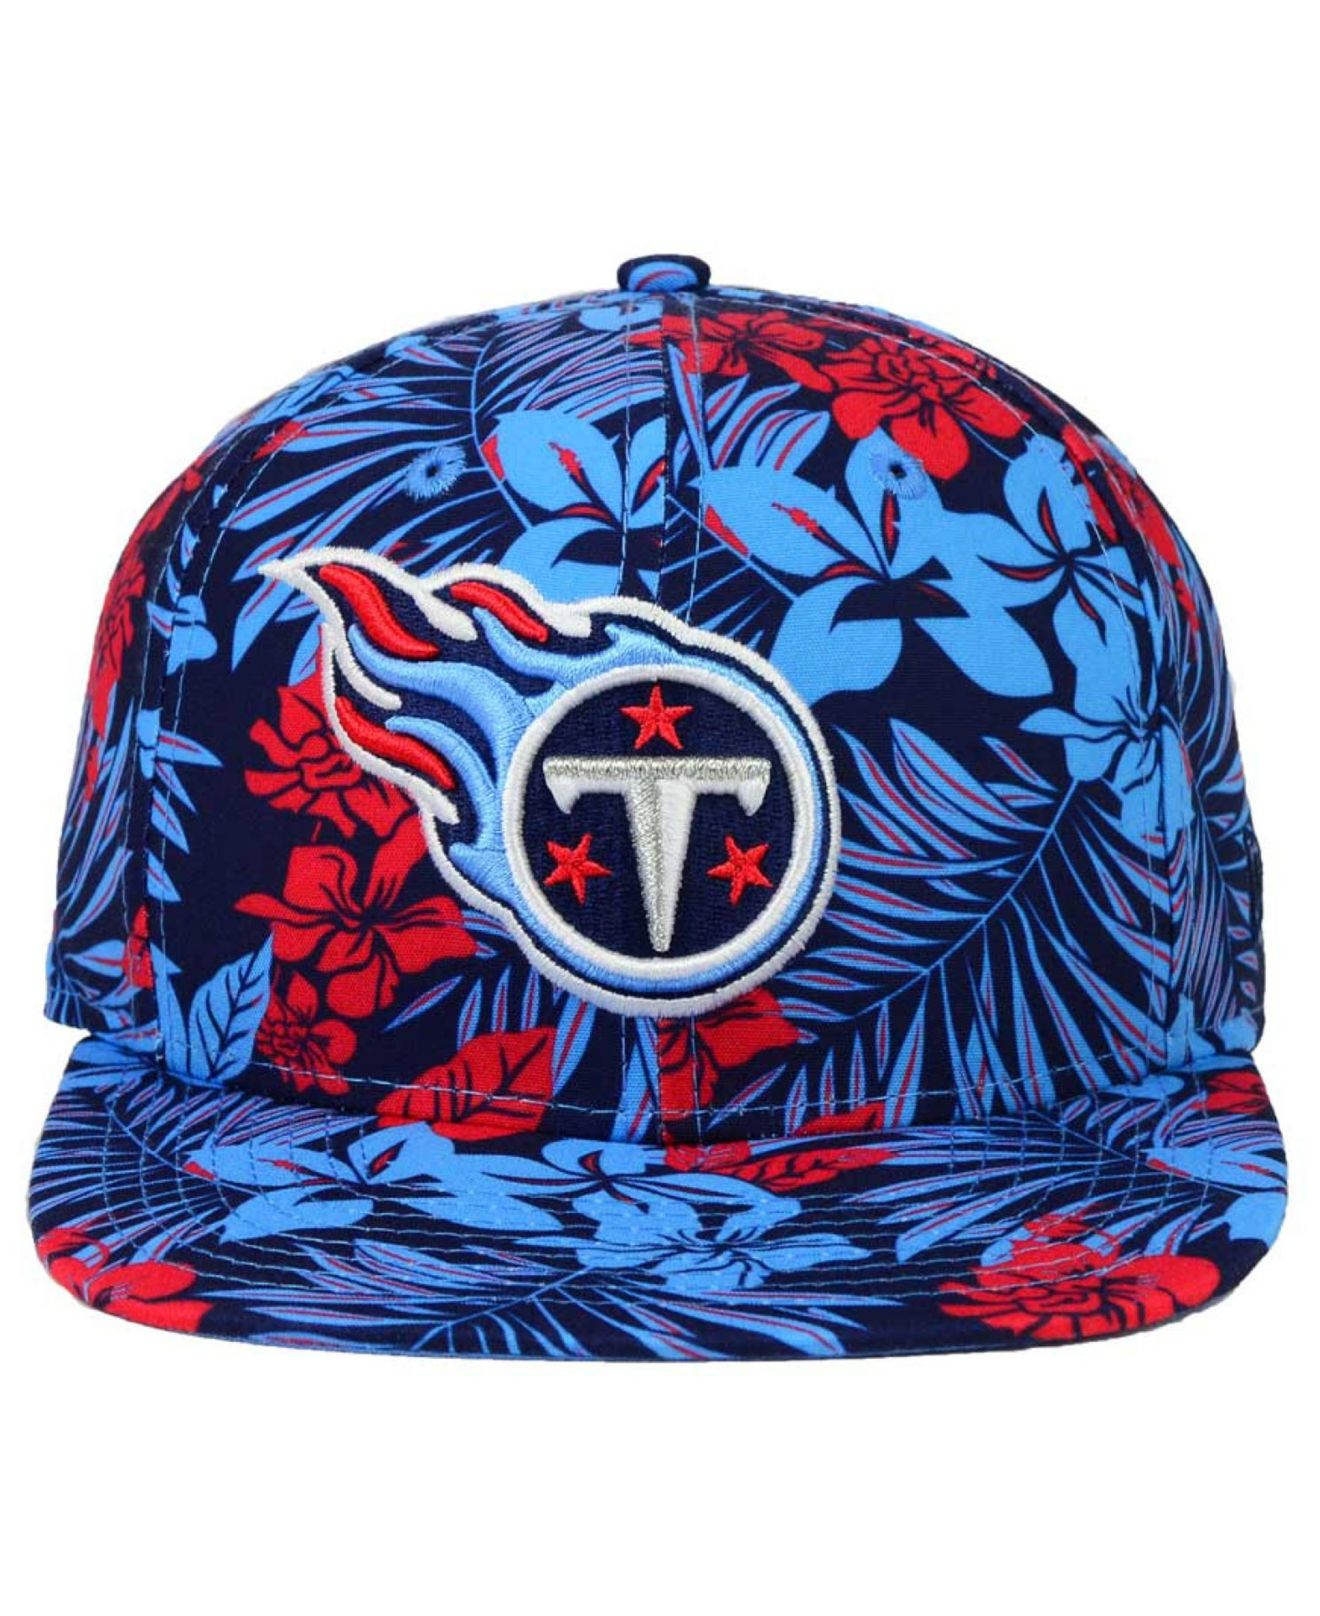 KTZ Tennessee Titans Wowie Snapback Cap in Blue for Men